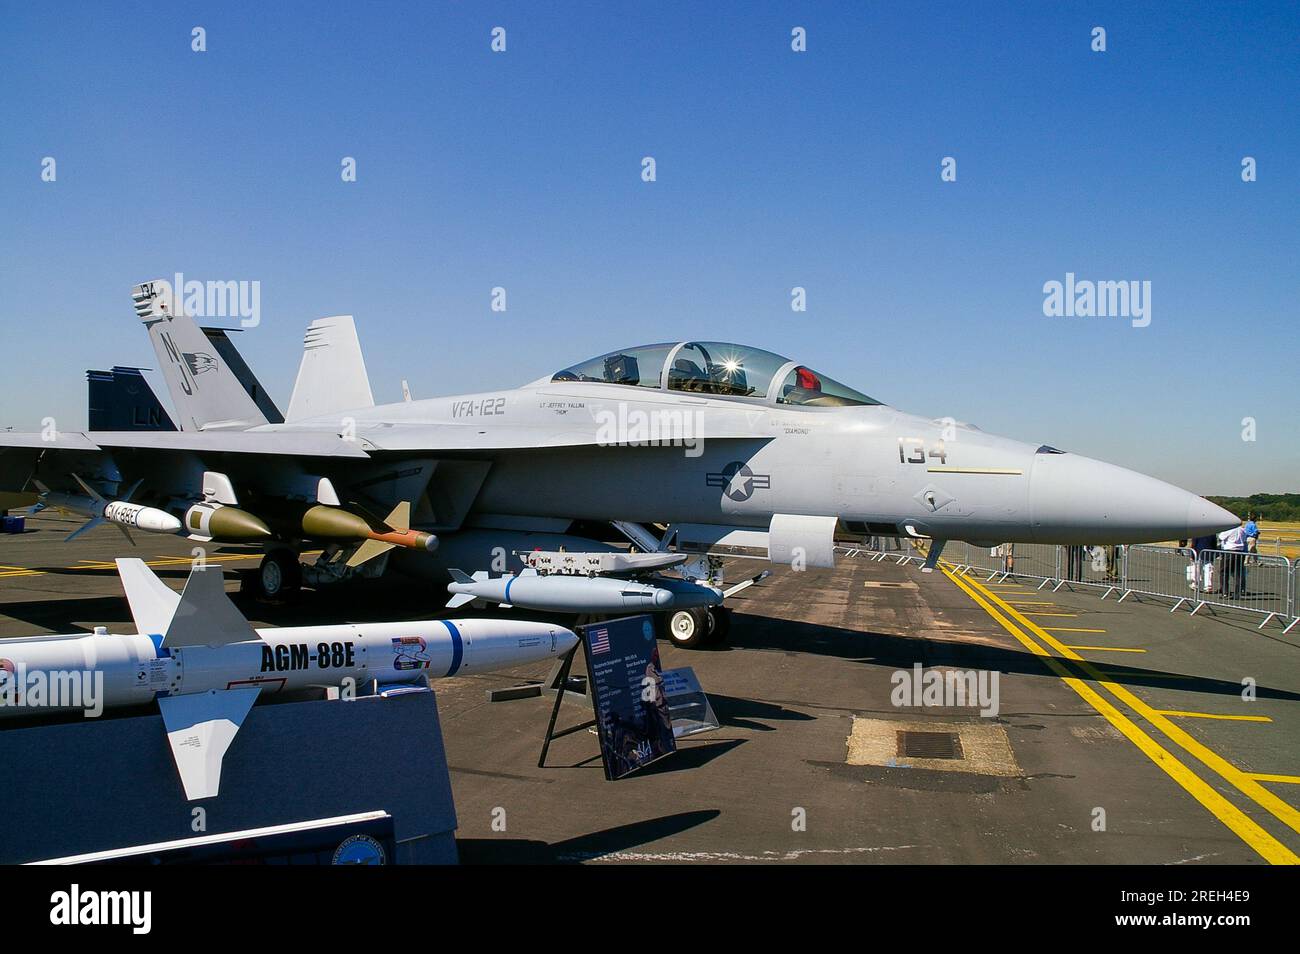 Boeing F/A-18F Super Hornet displayed with weapons at the Farnborough International Airshow 2006, UK. AGM-88E missile antiradiation guided missile Stock Photo